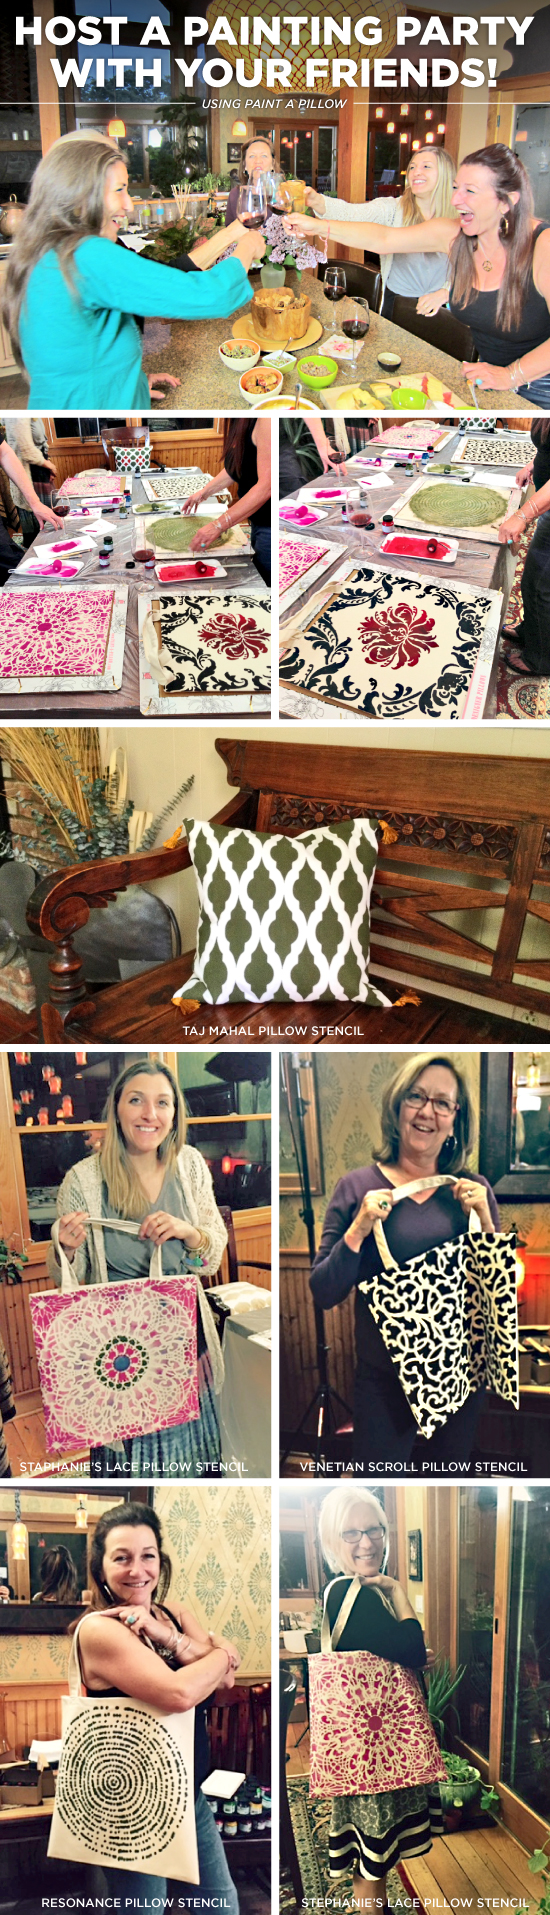 Cutting Edge Stencils shares how to host a Paint-A-Pillow craft night to make DIY accent pillows. http://paintapillow.com/index.php/paint-a-pillow-6-pillow-party-kit.html